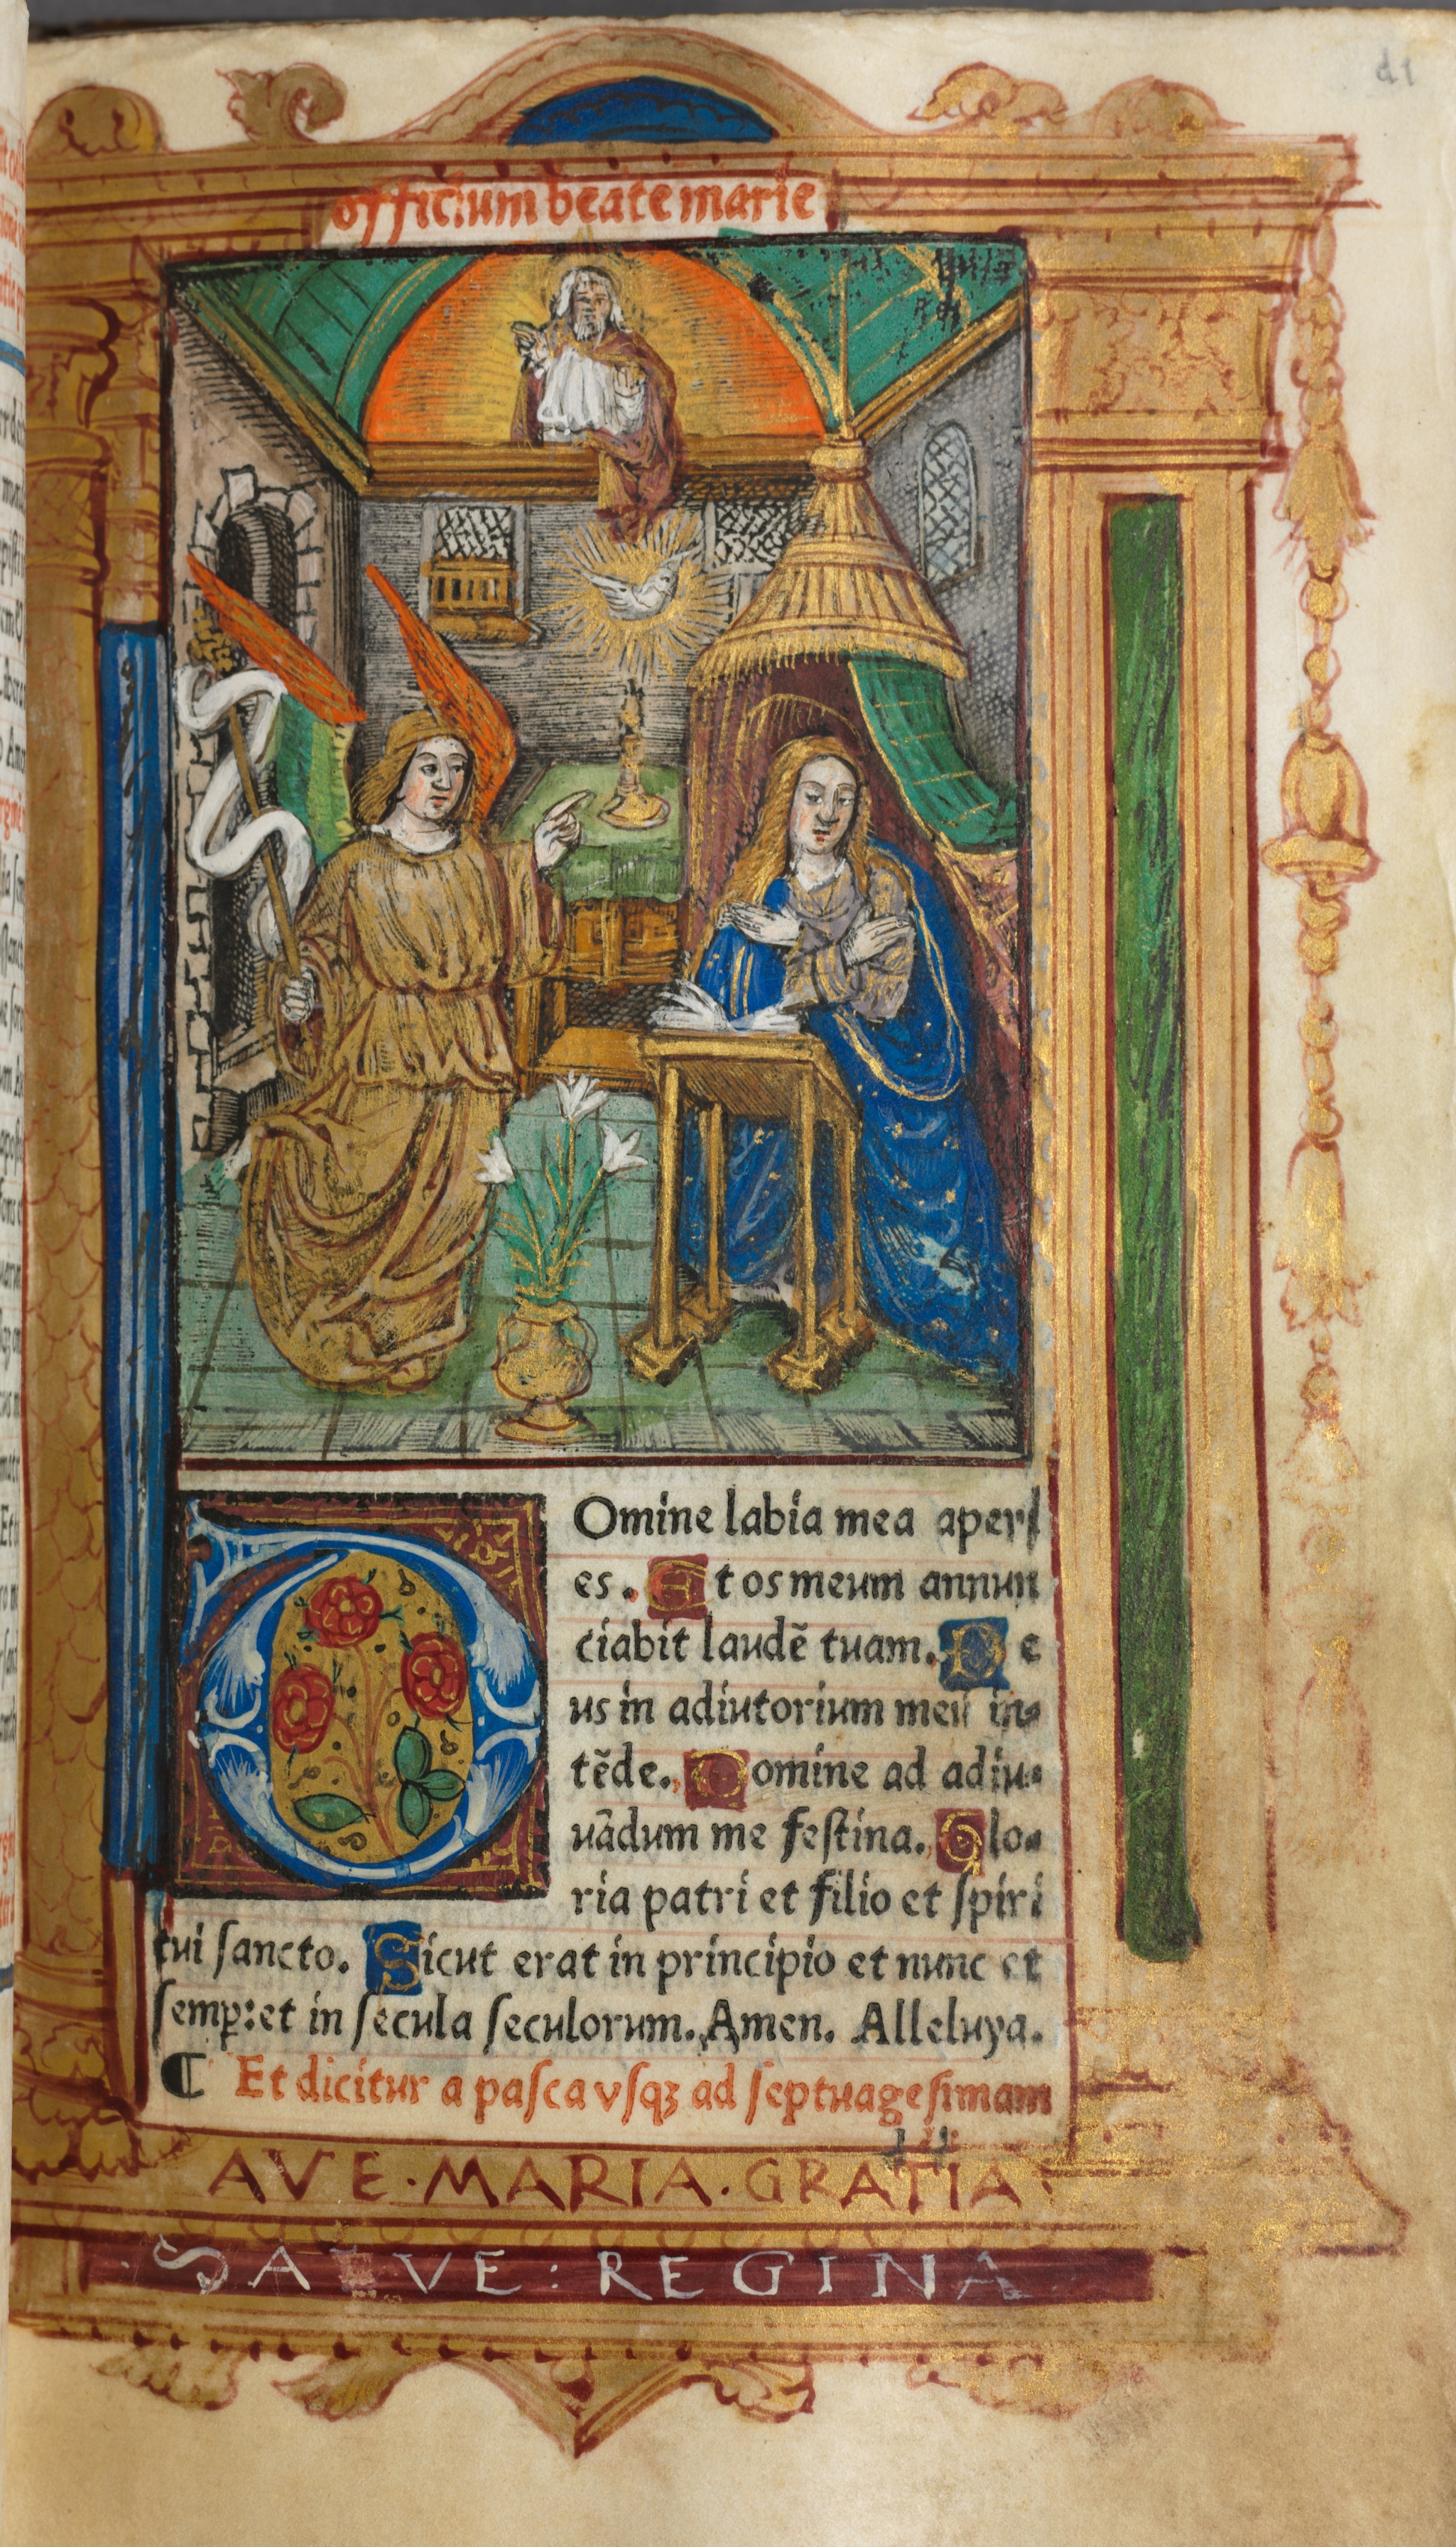 Printed Book of Hours (Use of Rome): fol. 25r, The Annunciation